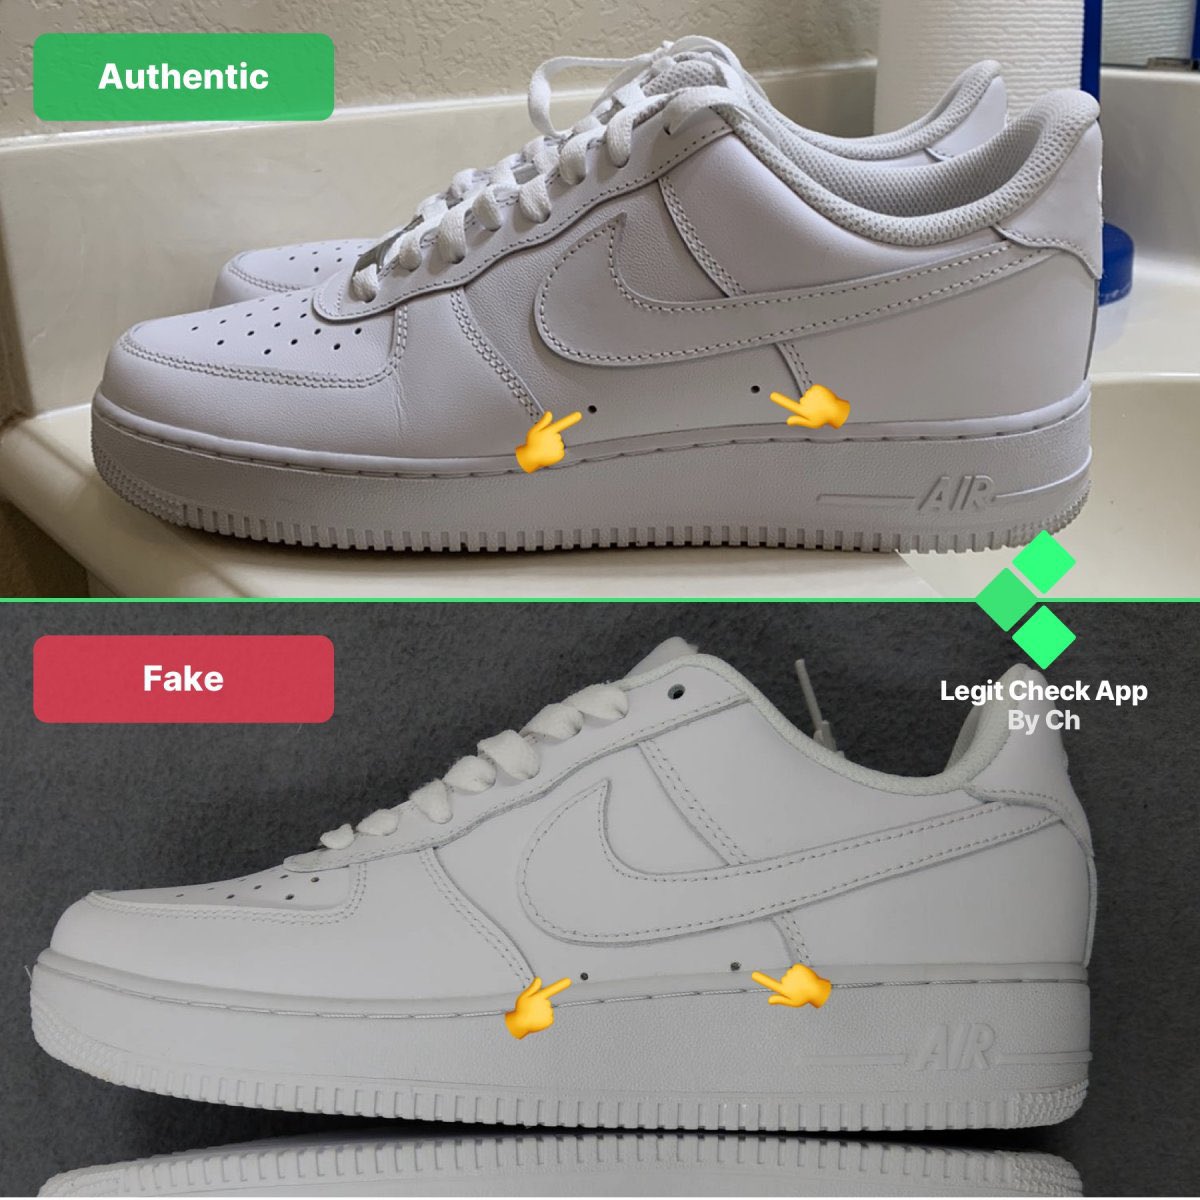 Laughter waste away homework CADDY on Twitter: "the fake AF1 pairs will have their Swoosh logo's curving  looking more out of hand like zodwa , while the authentic Swoosh's curving  goes more “natural” and smoother. That